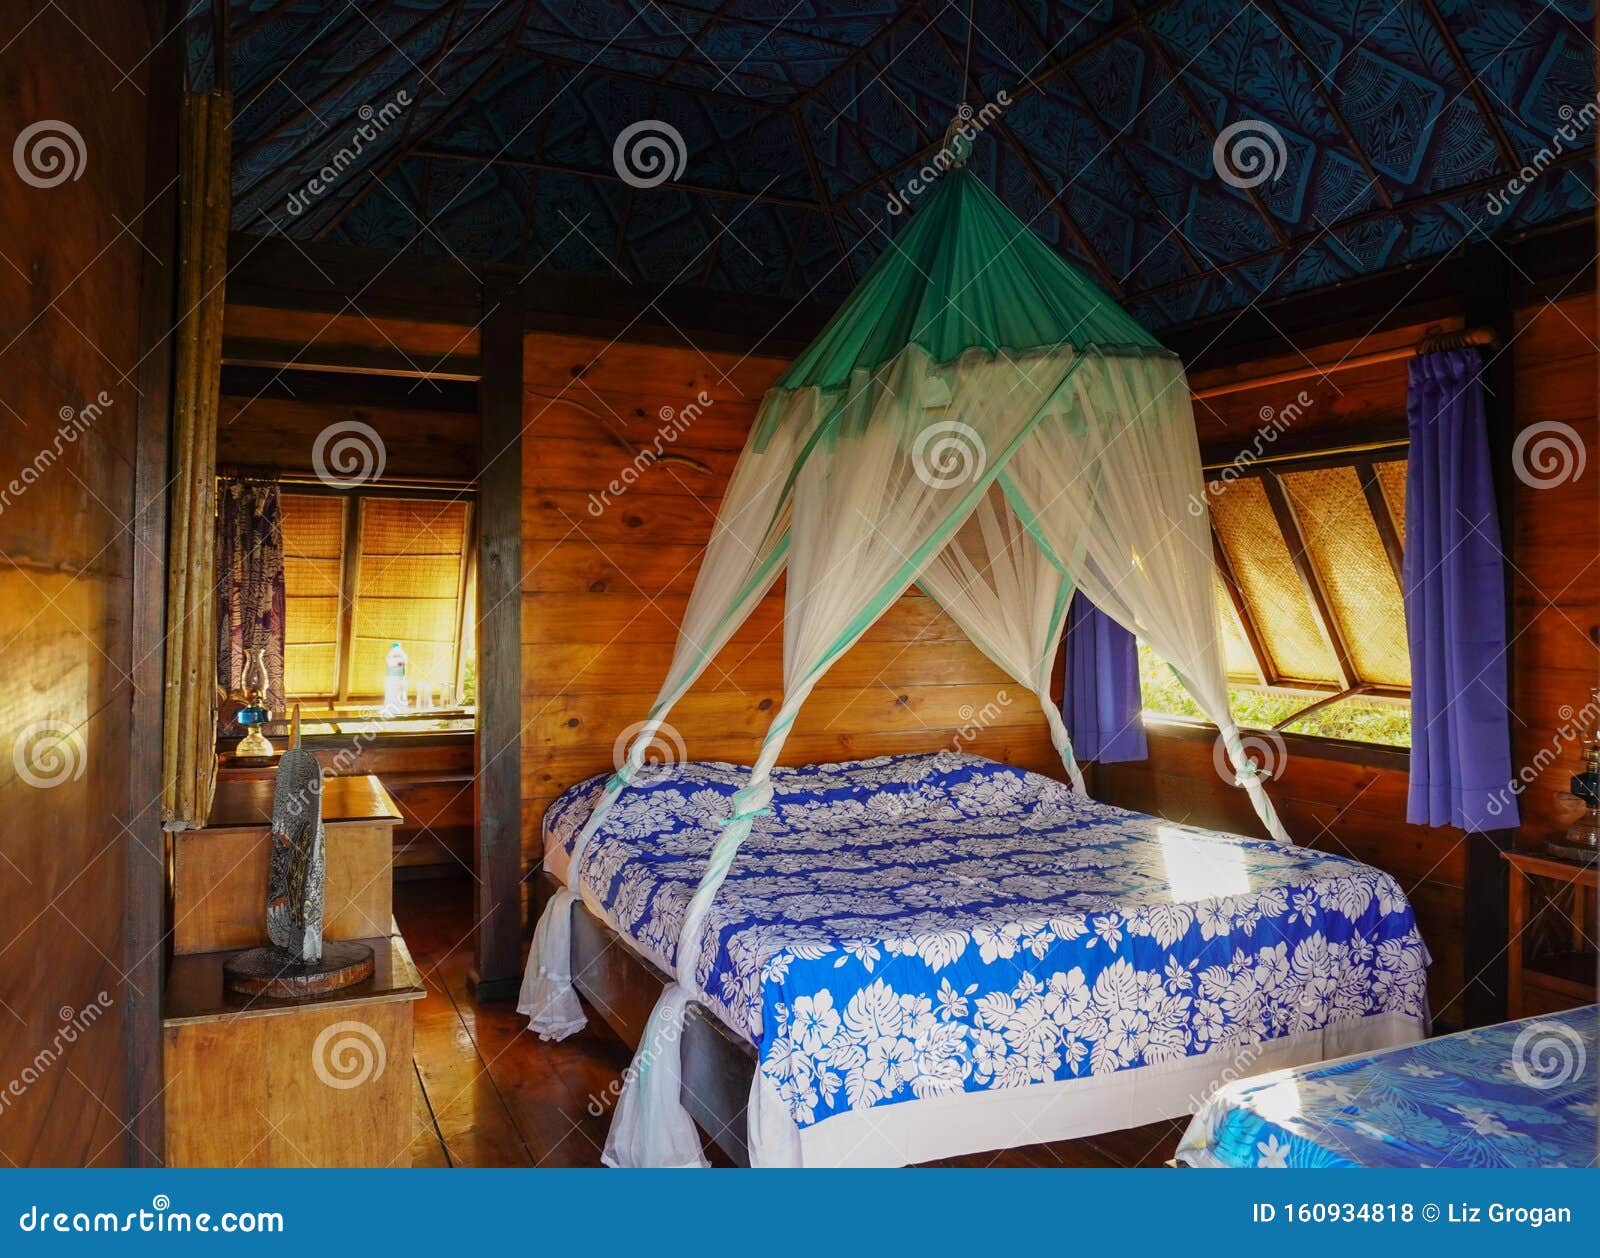 the interior of a rustic wooden bungalow on the tropical island of fakarava in french polynesia